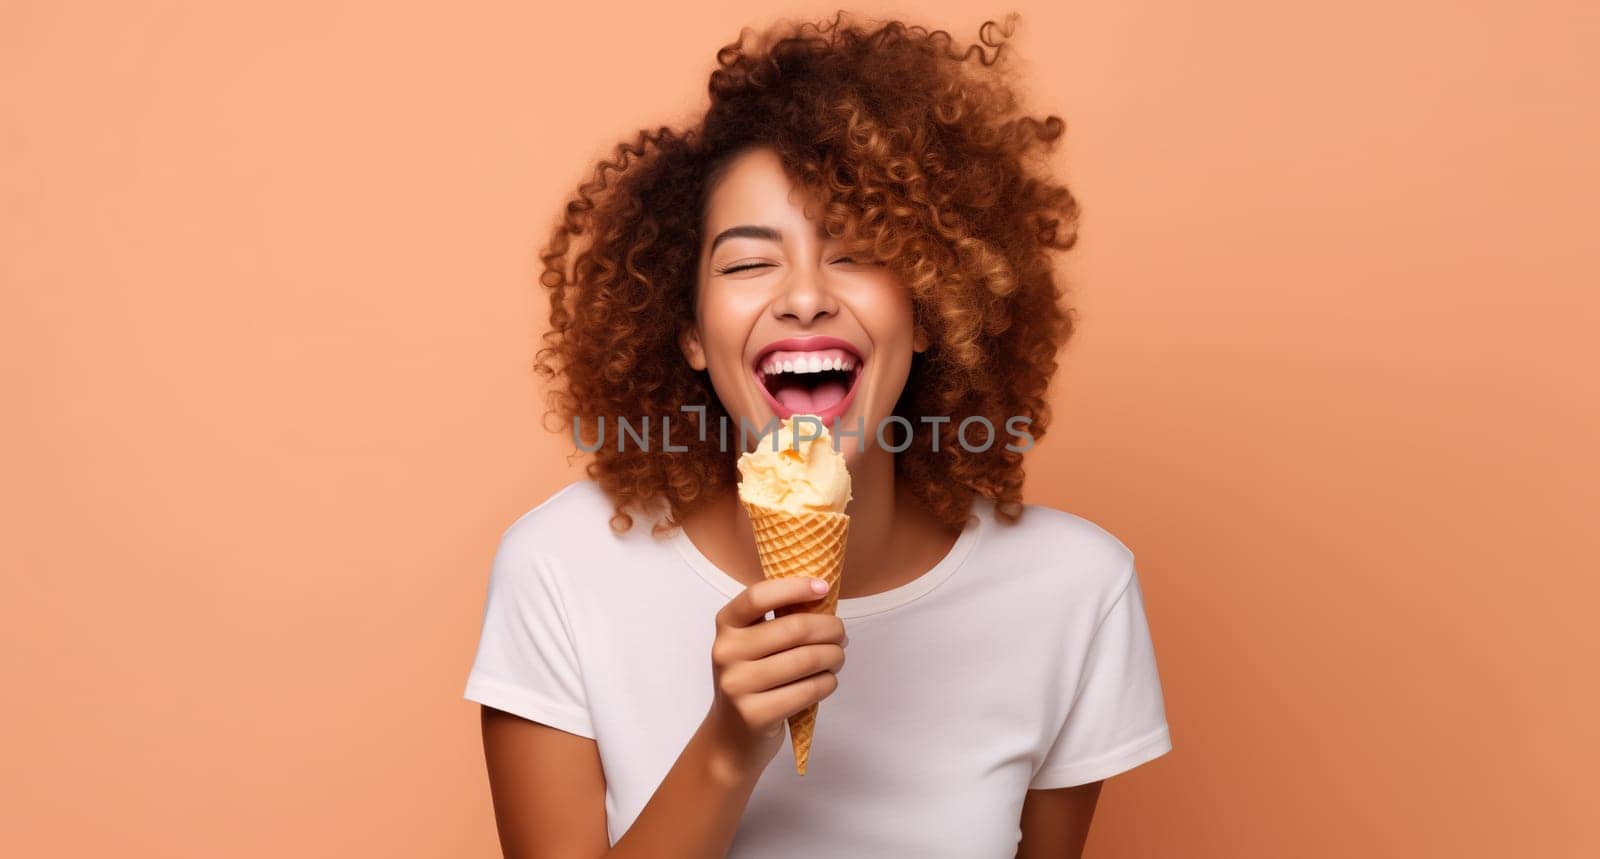 Summer portrait of happy cheerful smiling young woman eating ice cream cone on studio background by Rohappy